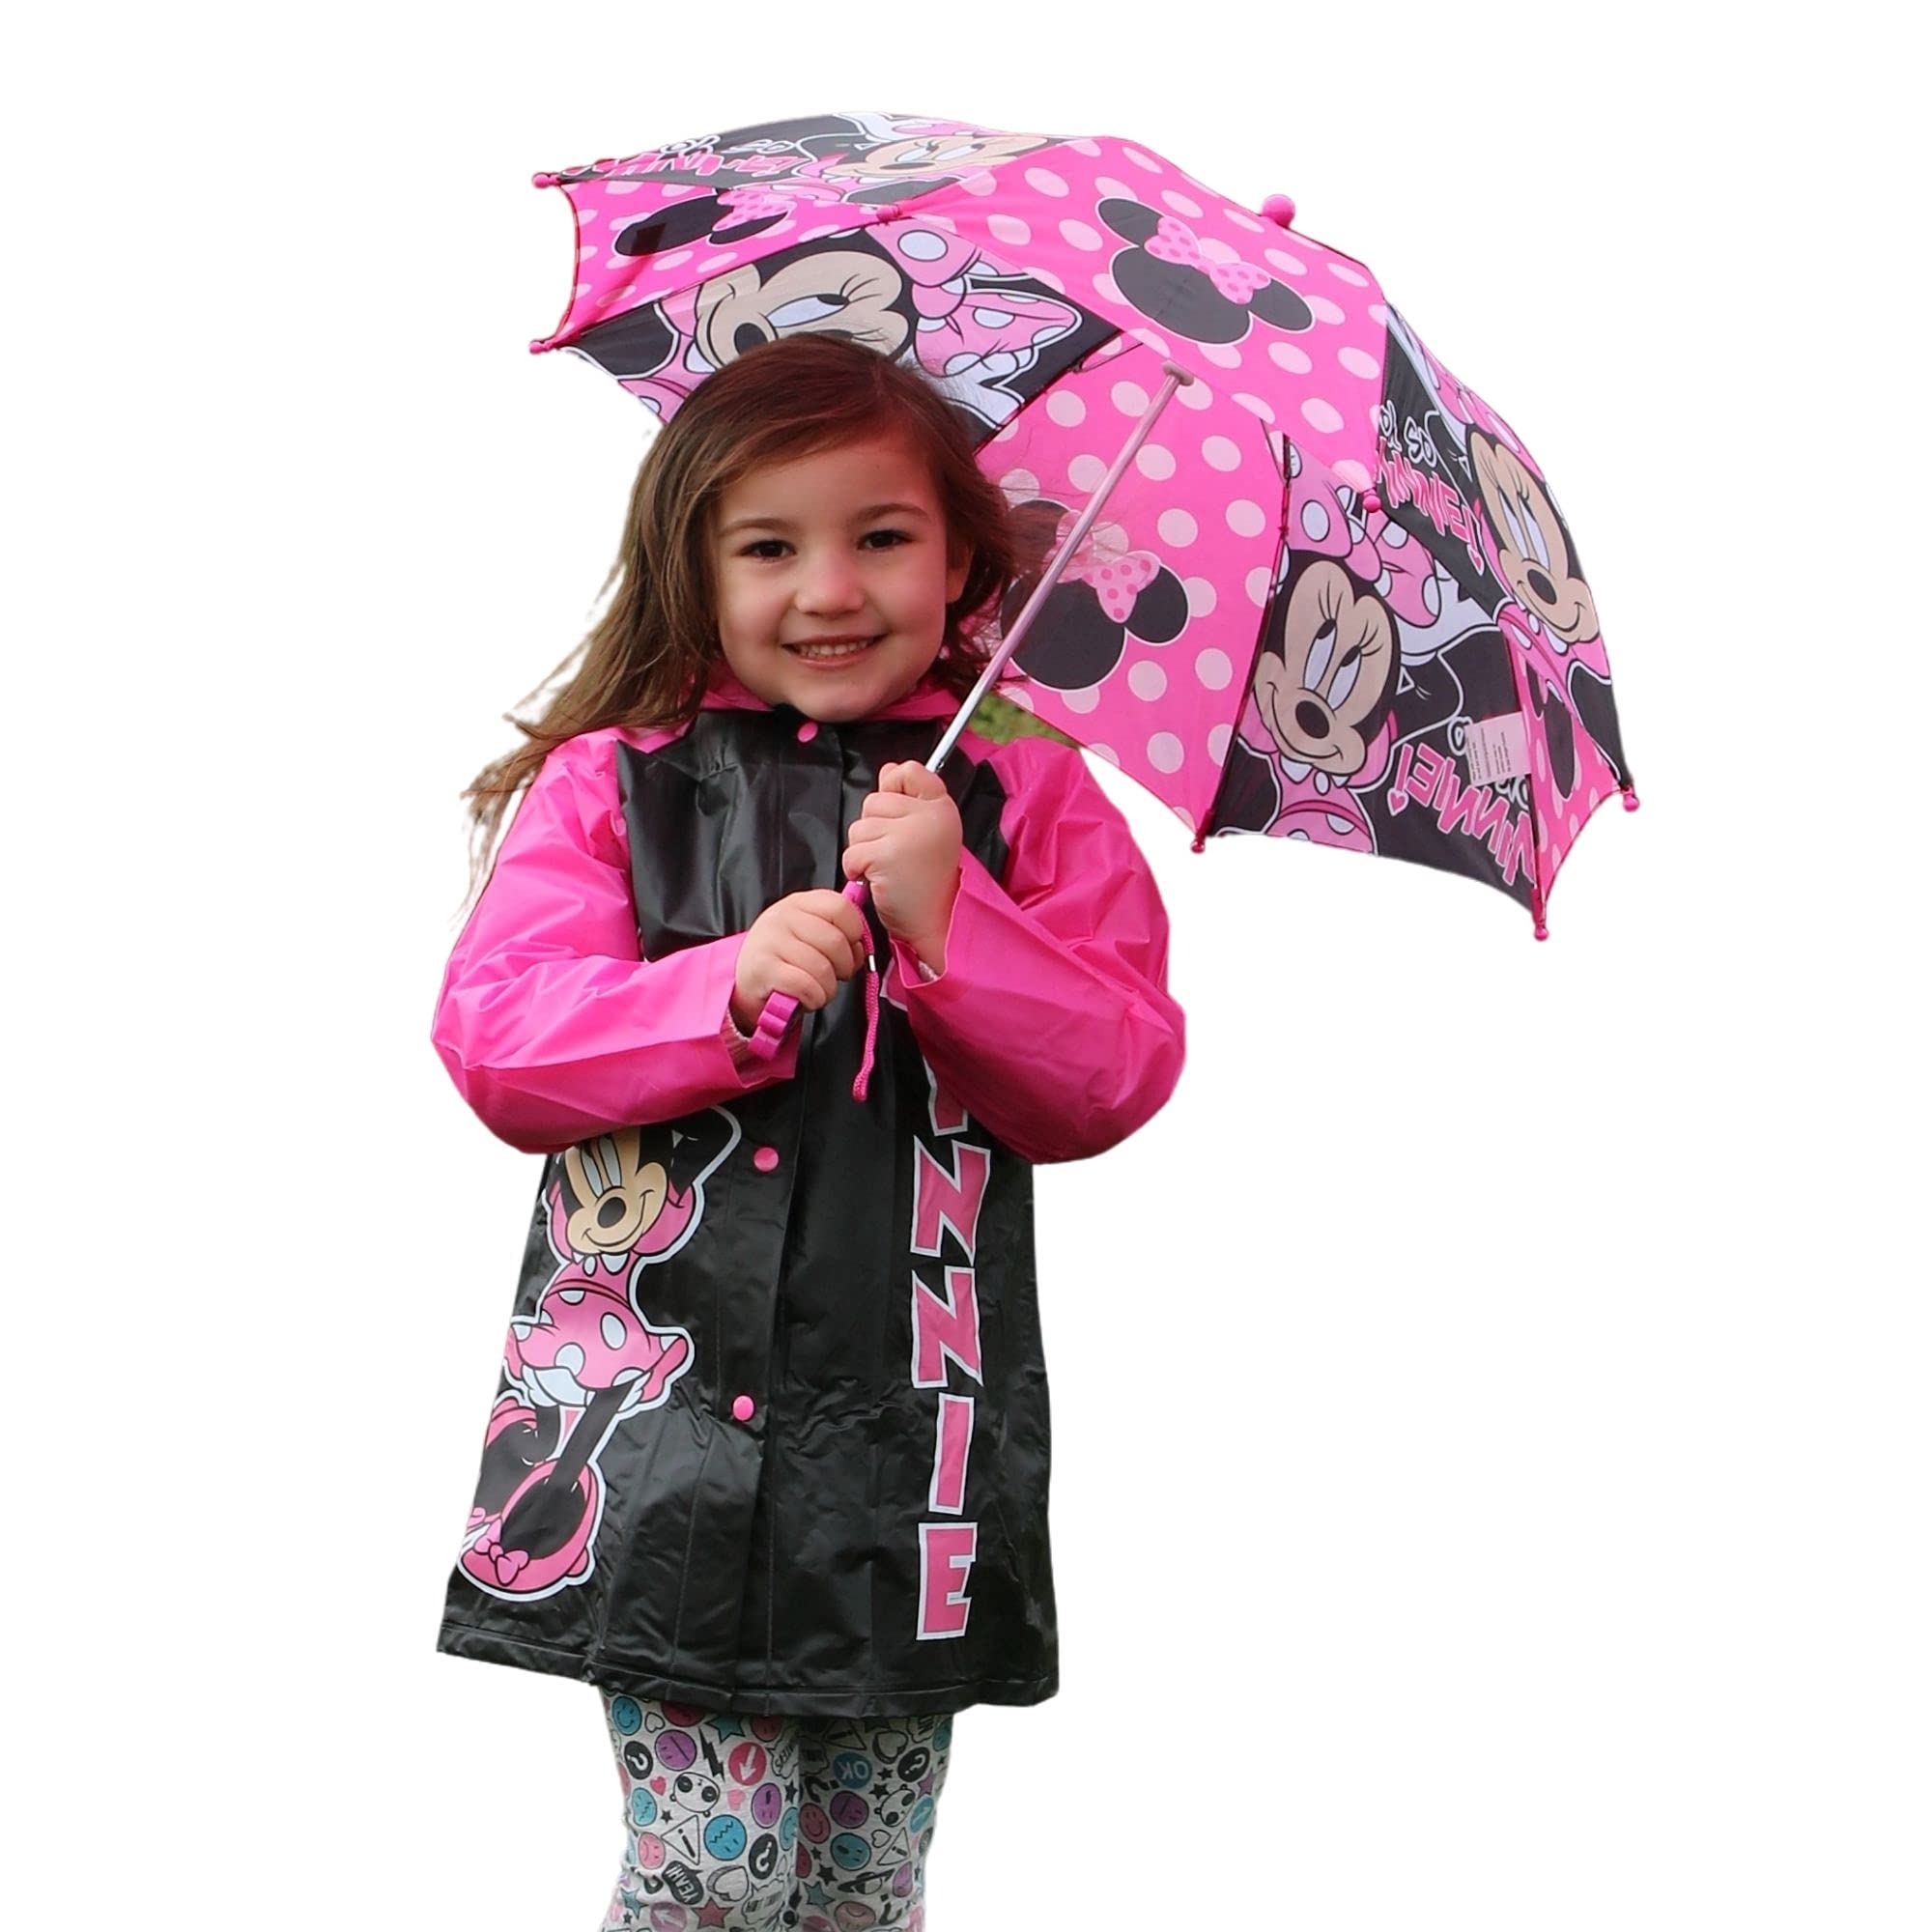 Disney Minnie Mouse Kids Umbrella with Matching Rain Poncho for Girls Ages 2-7 - image 2 of 8